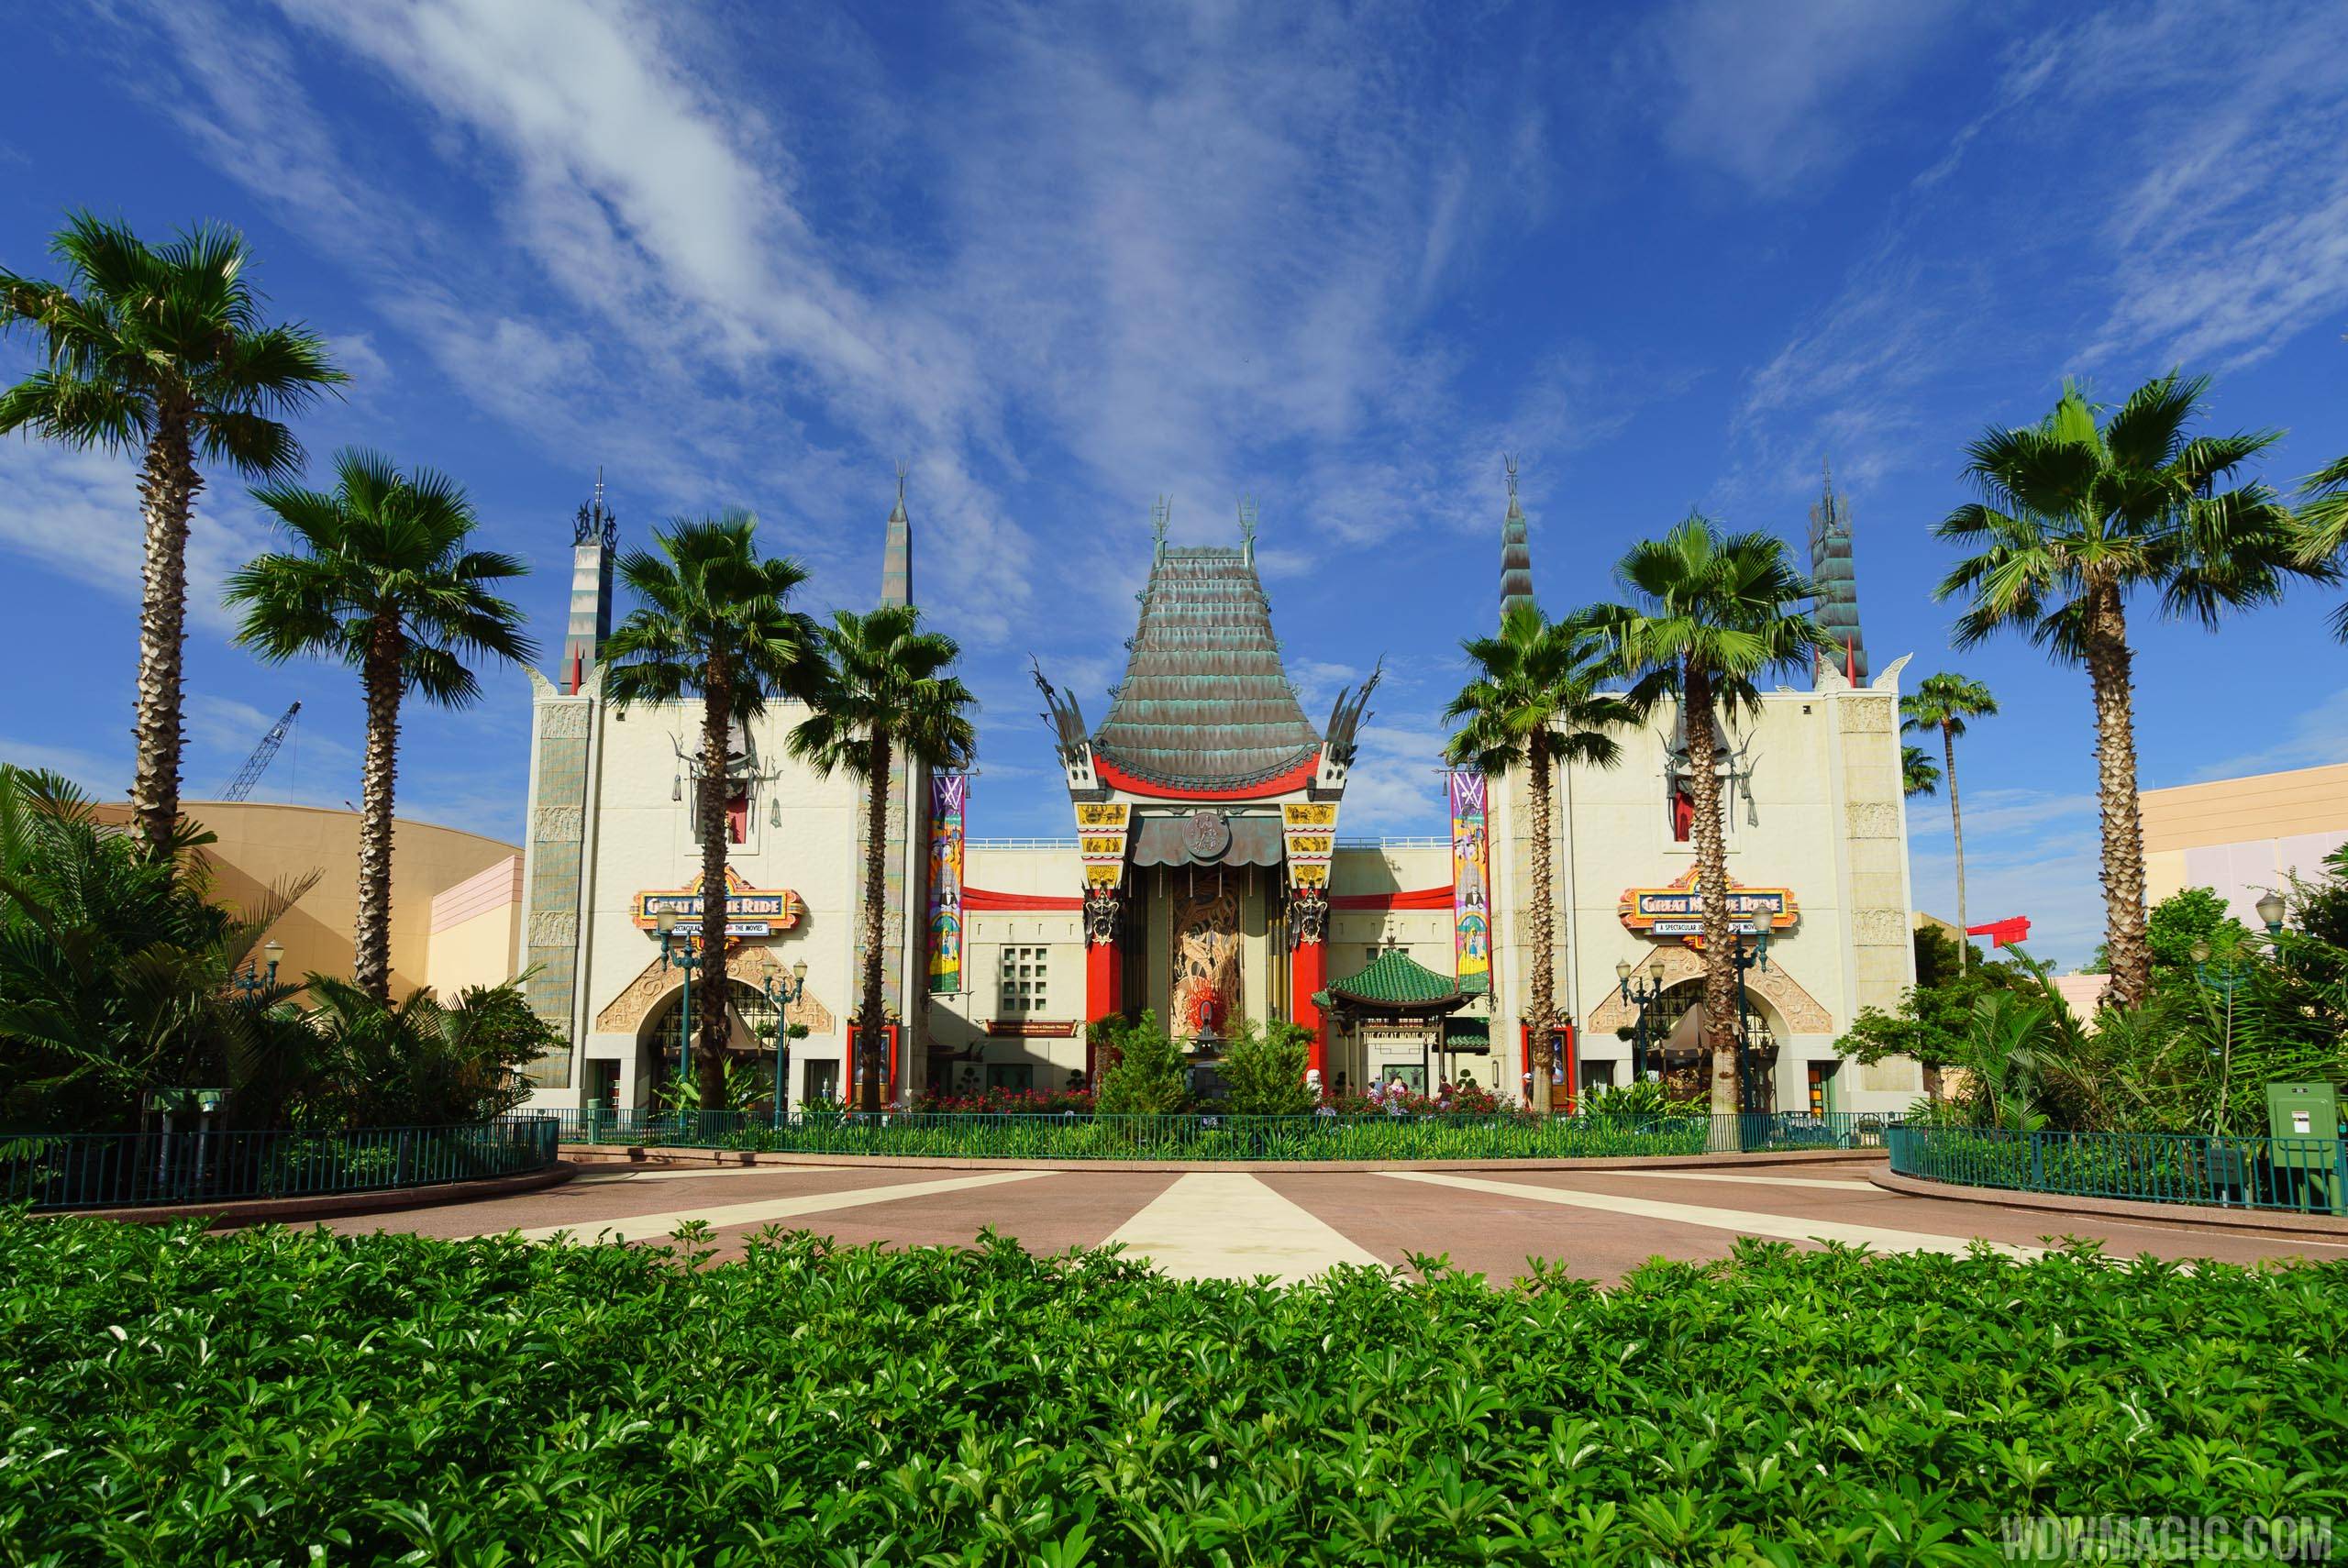 MGM'S Castle